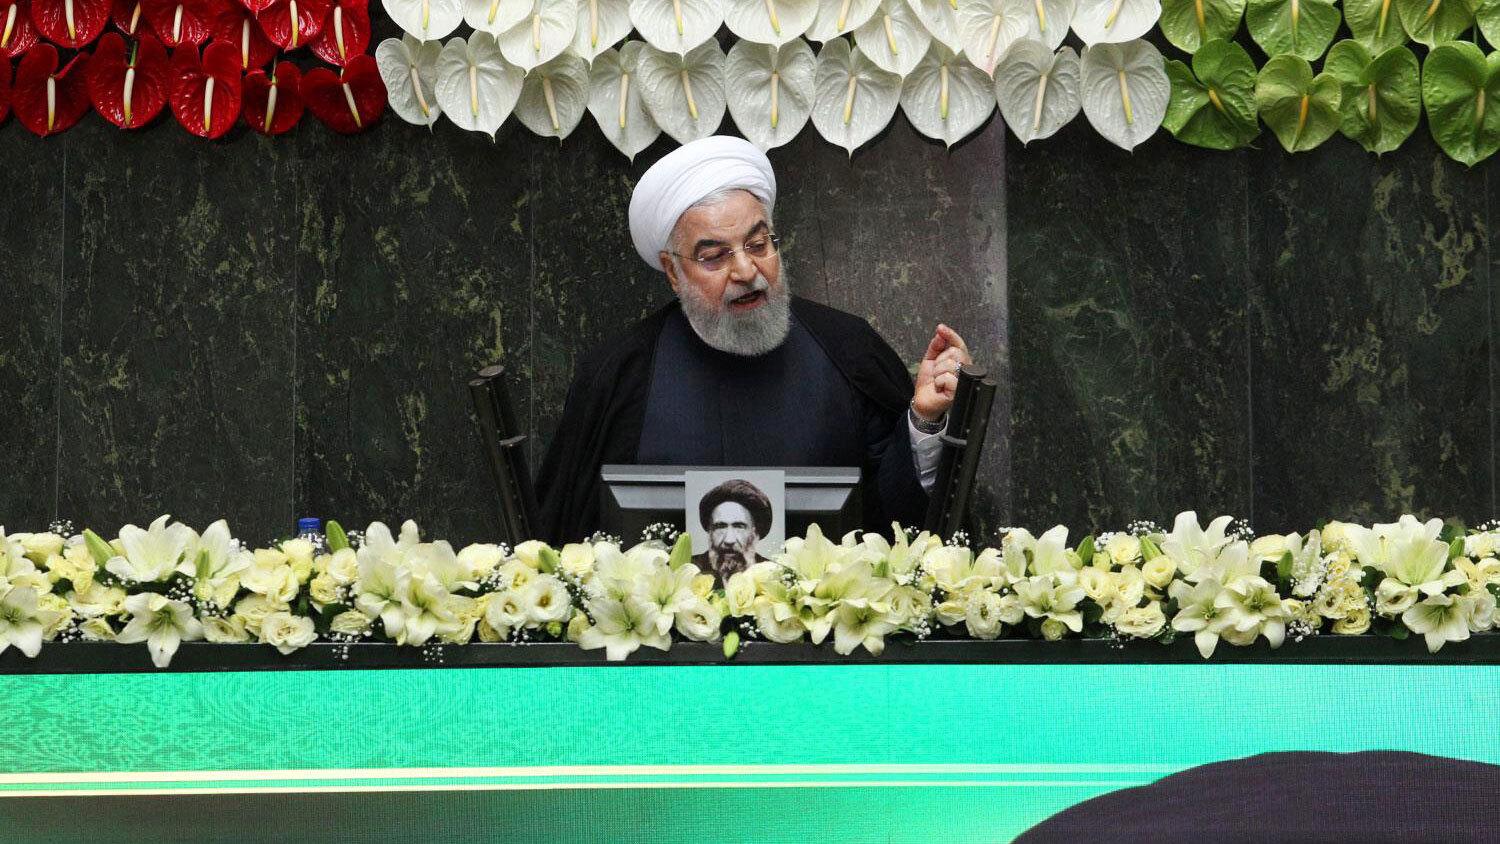 Iranian President Hassan Rouhani speaks during the opening ceremony of Iran's 11th parliament in Tehran, Iran, May 27, 2020.